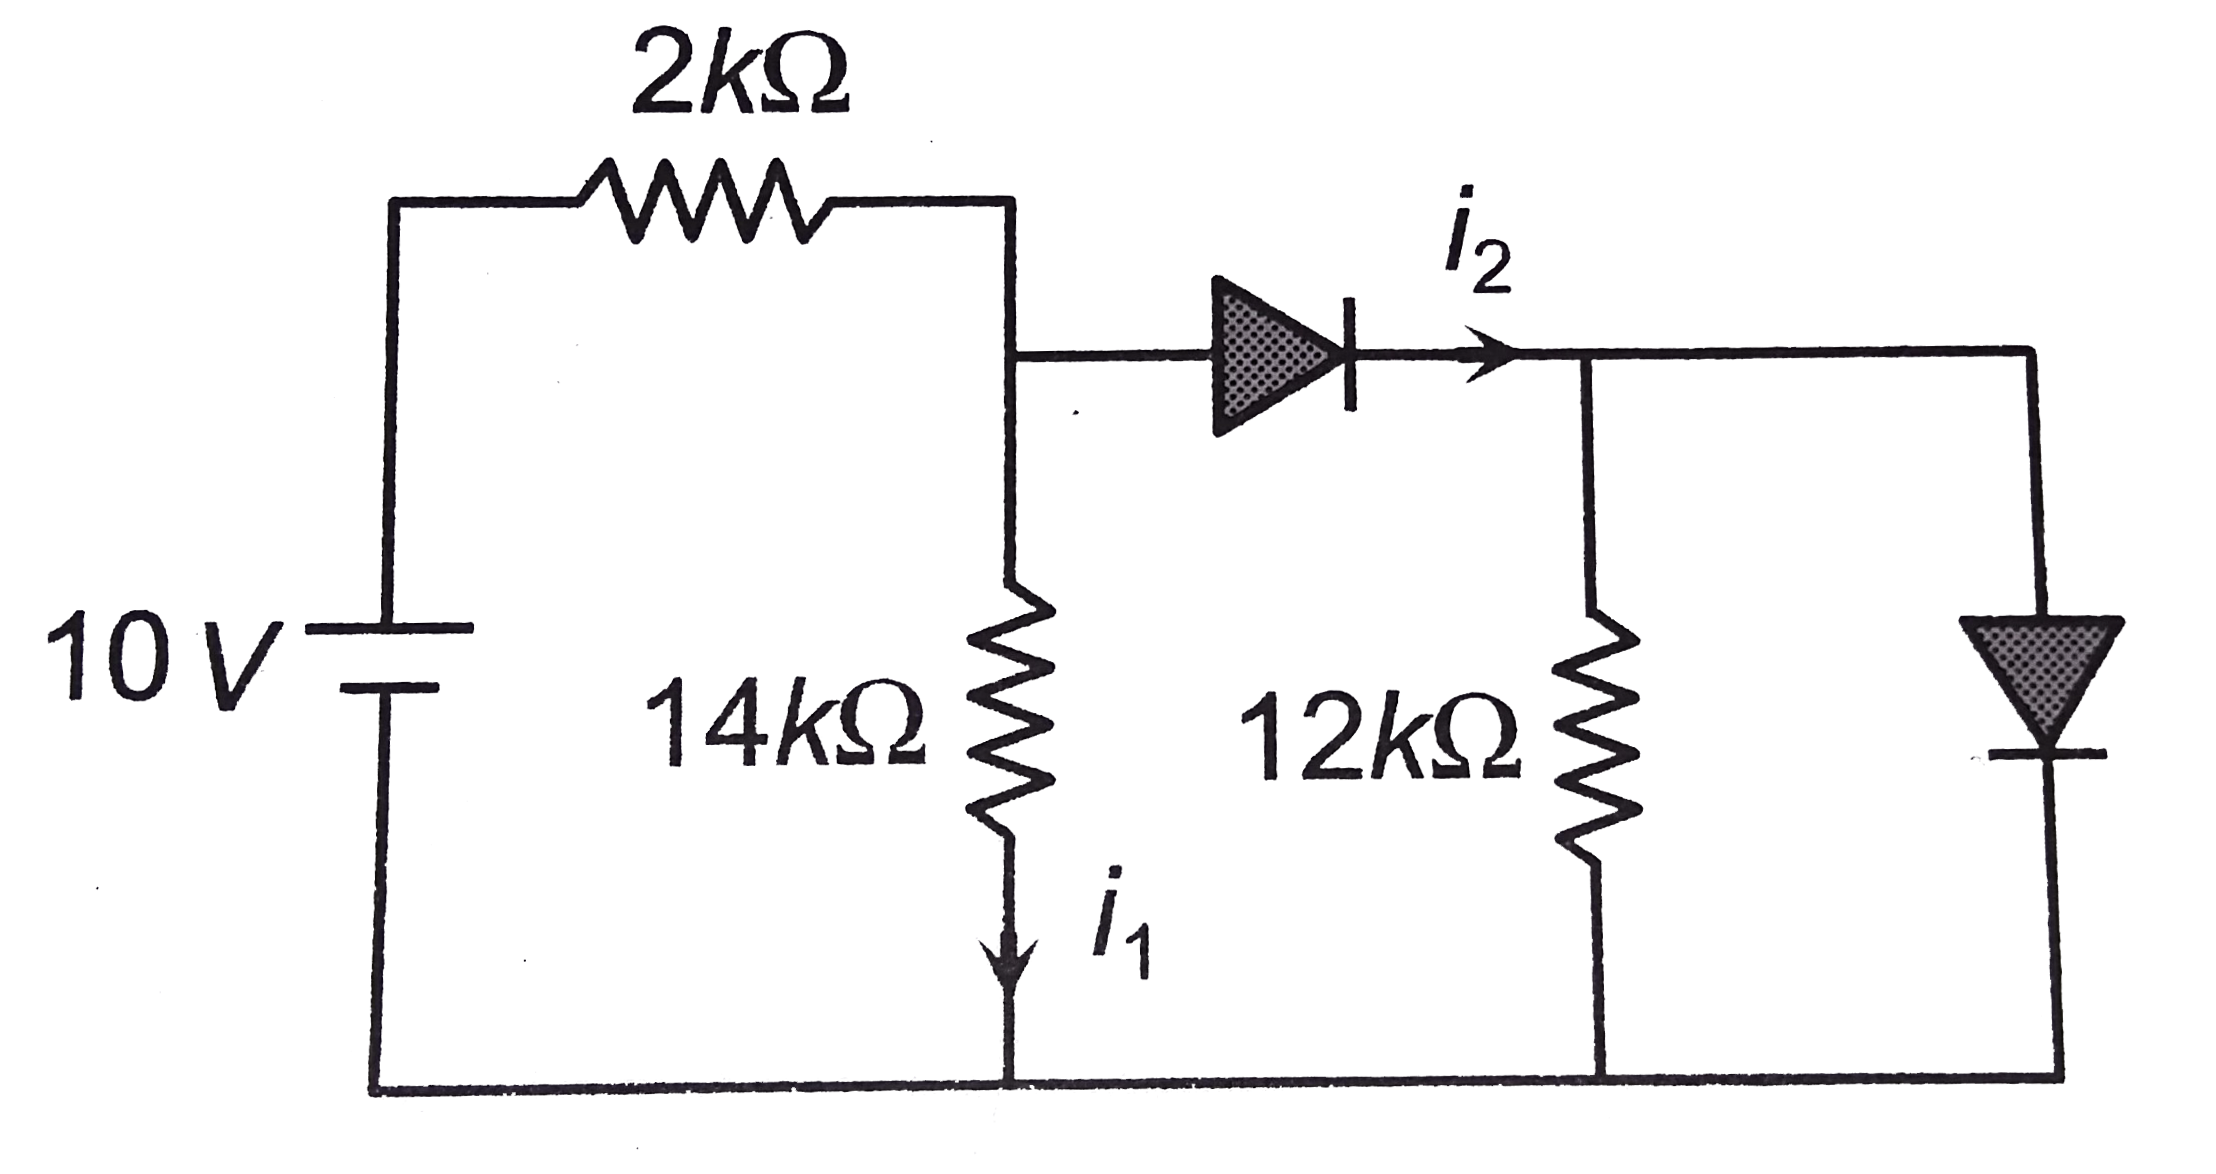 In the following circuit I(1) and I(2) are respectively